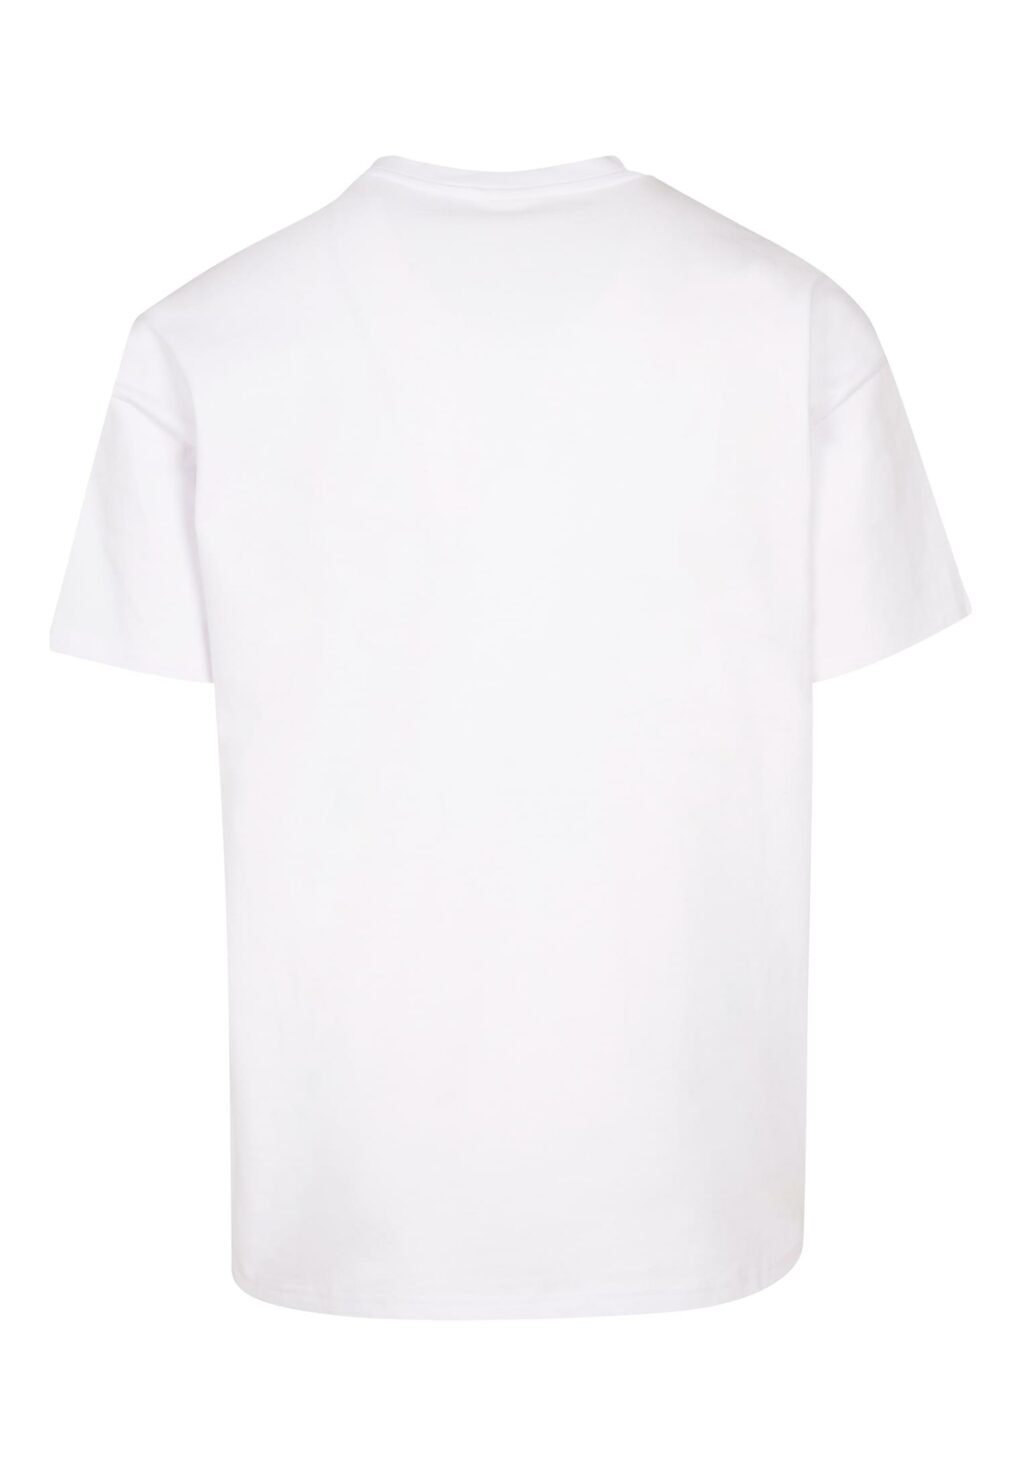 Football's coming Home Respect Oversize Tee white MT3124